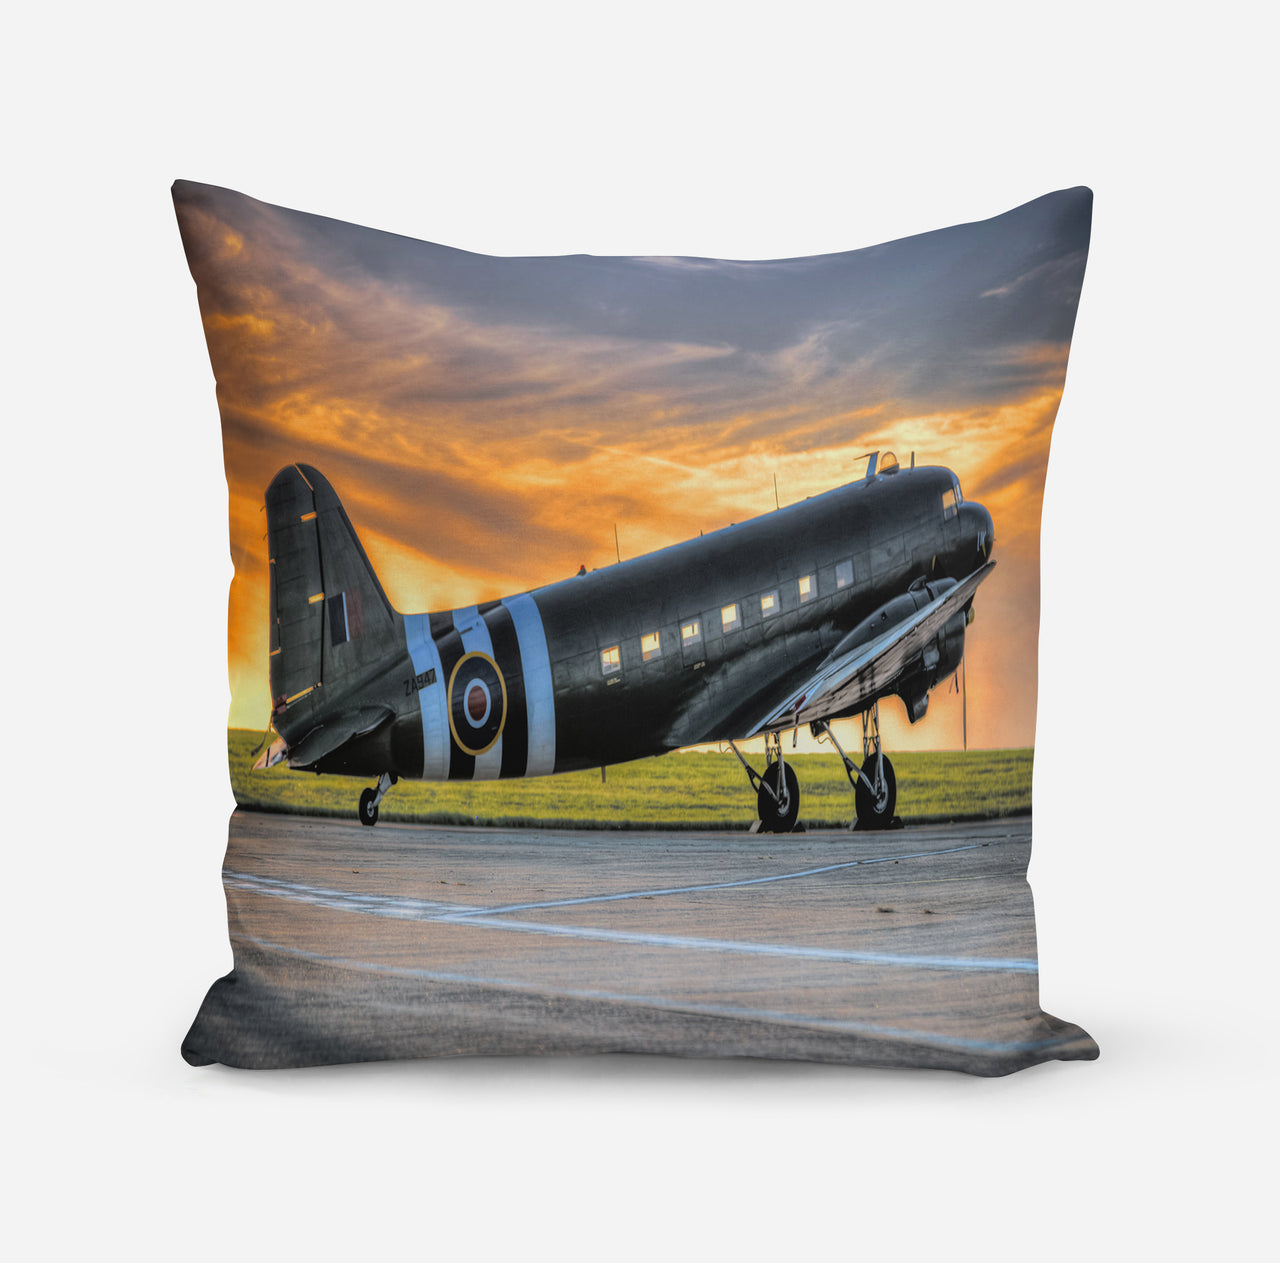 Old Airplane Parked During Sunset Designed Pillows